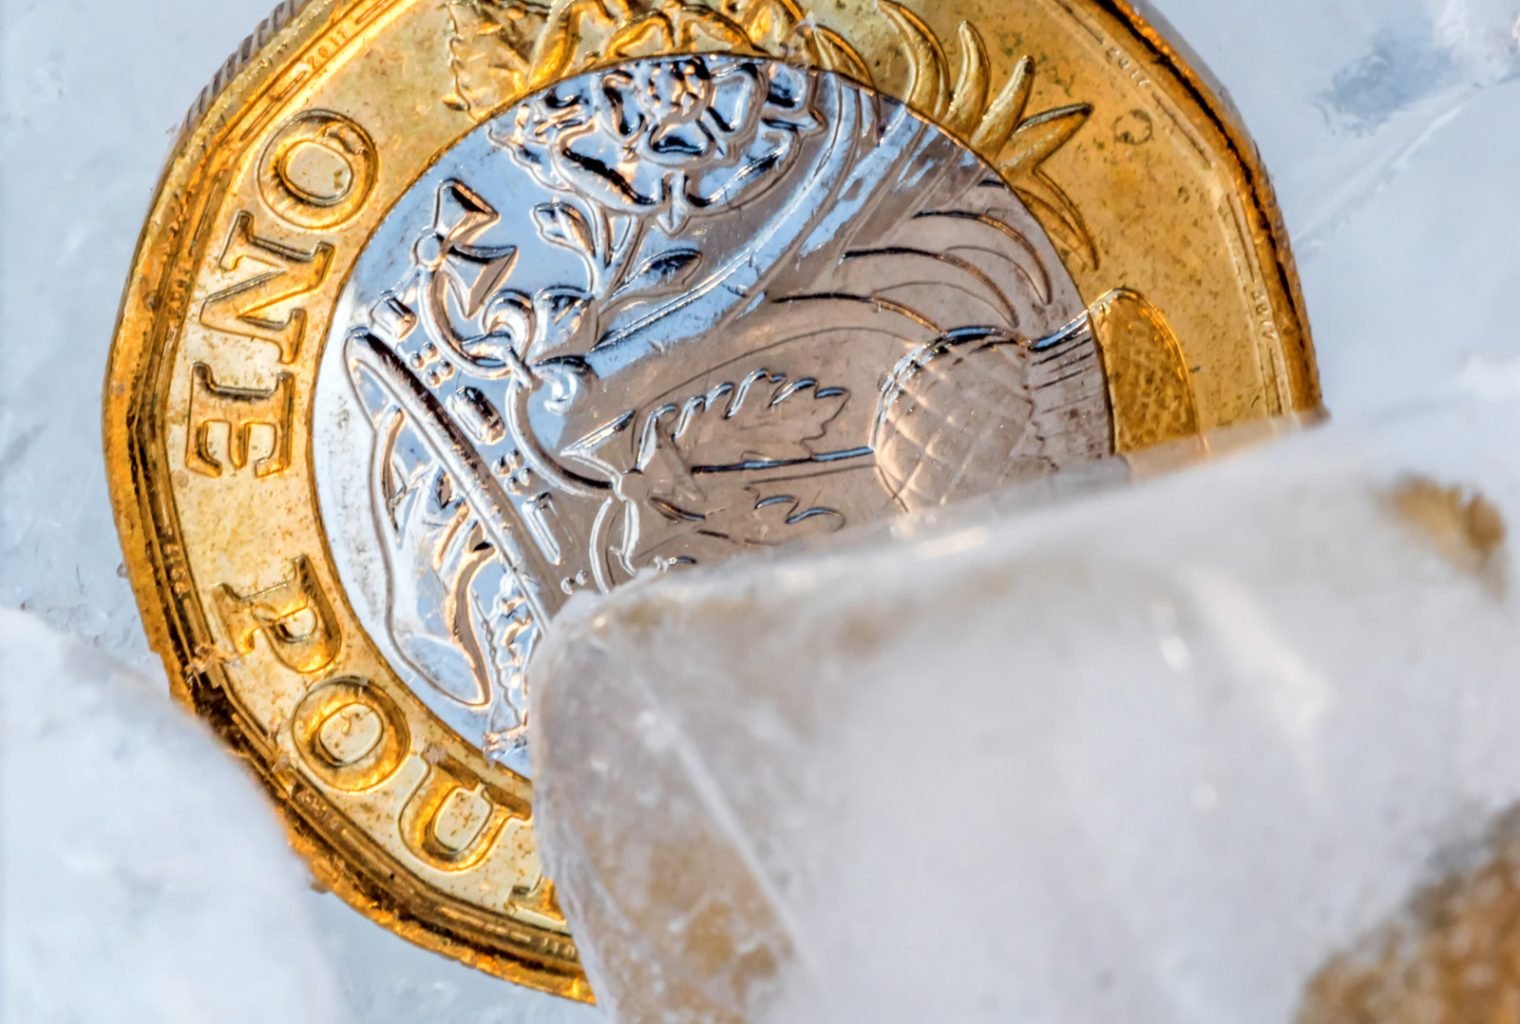 Funds Frozen Account Closed Uk Banks Target Cryptocurrency Owners - 